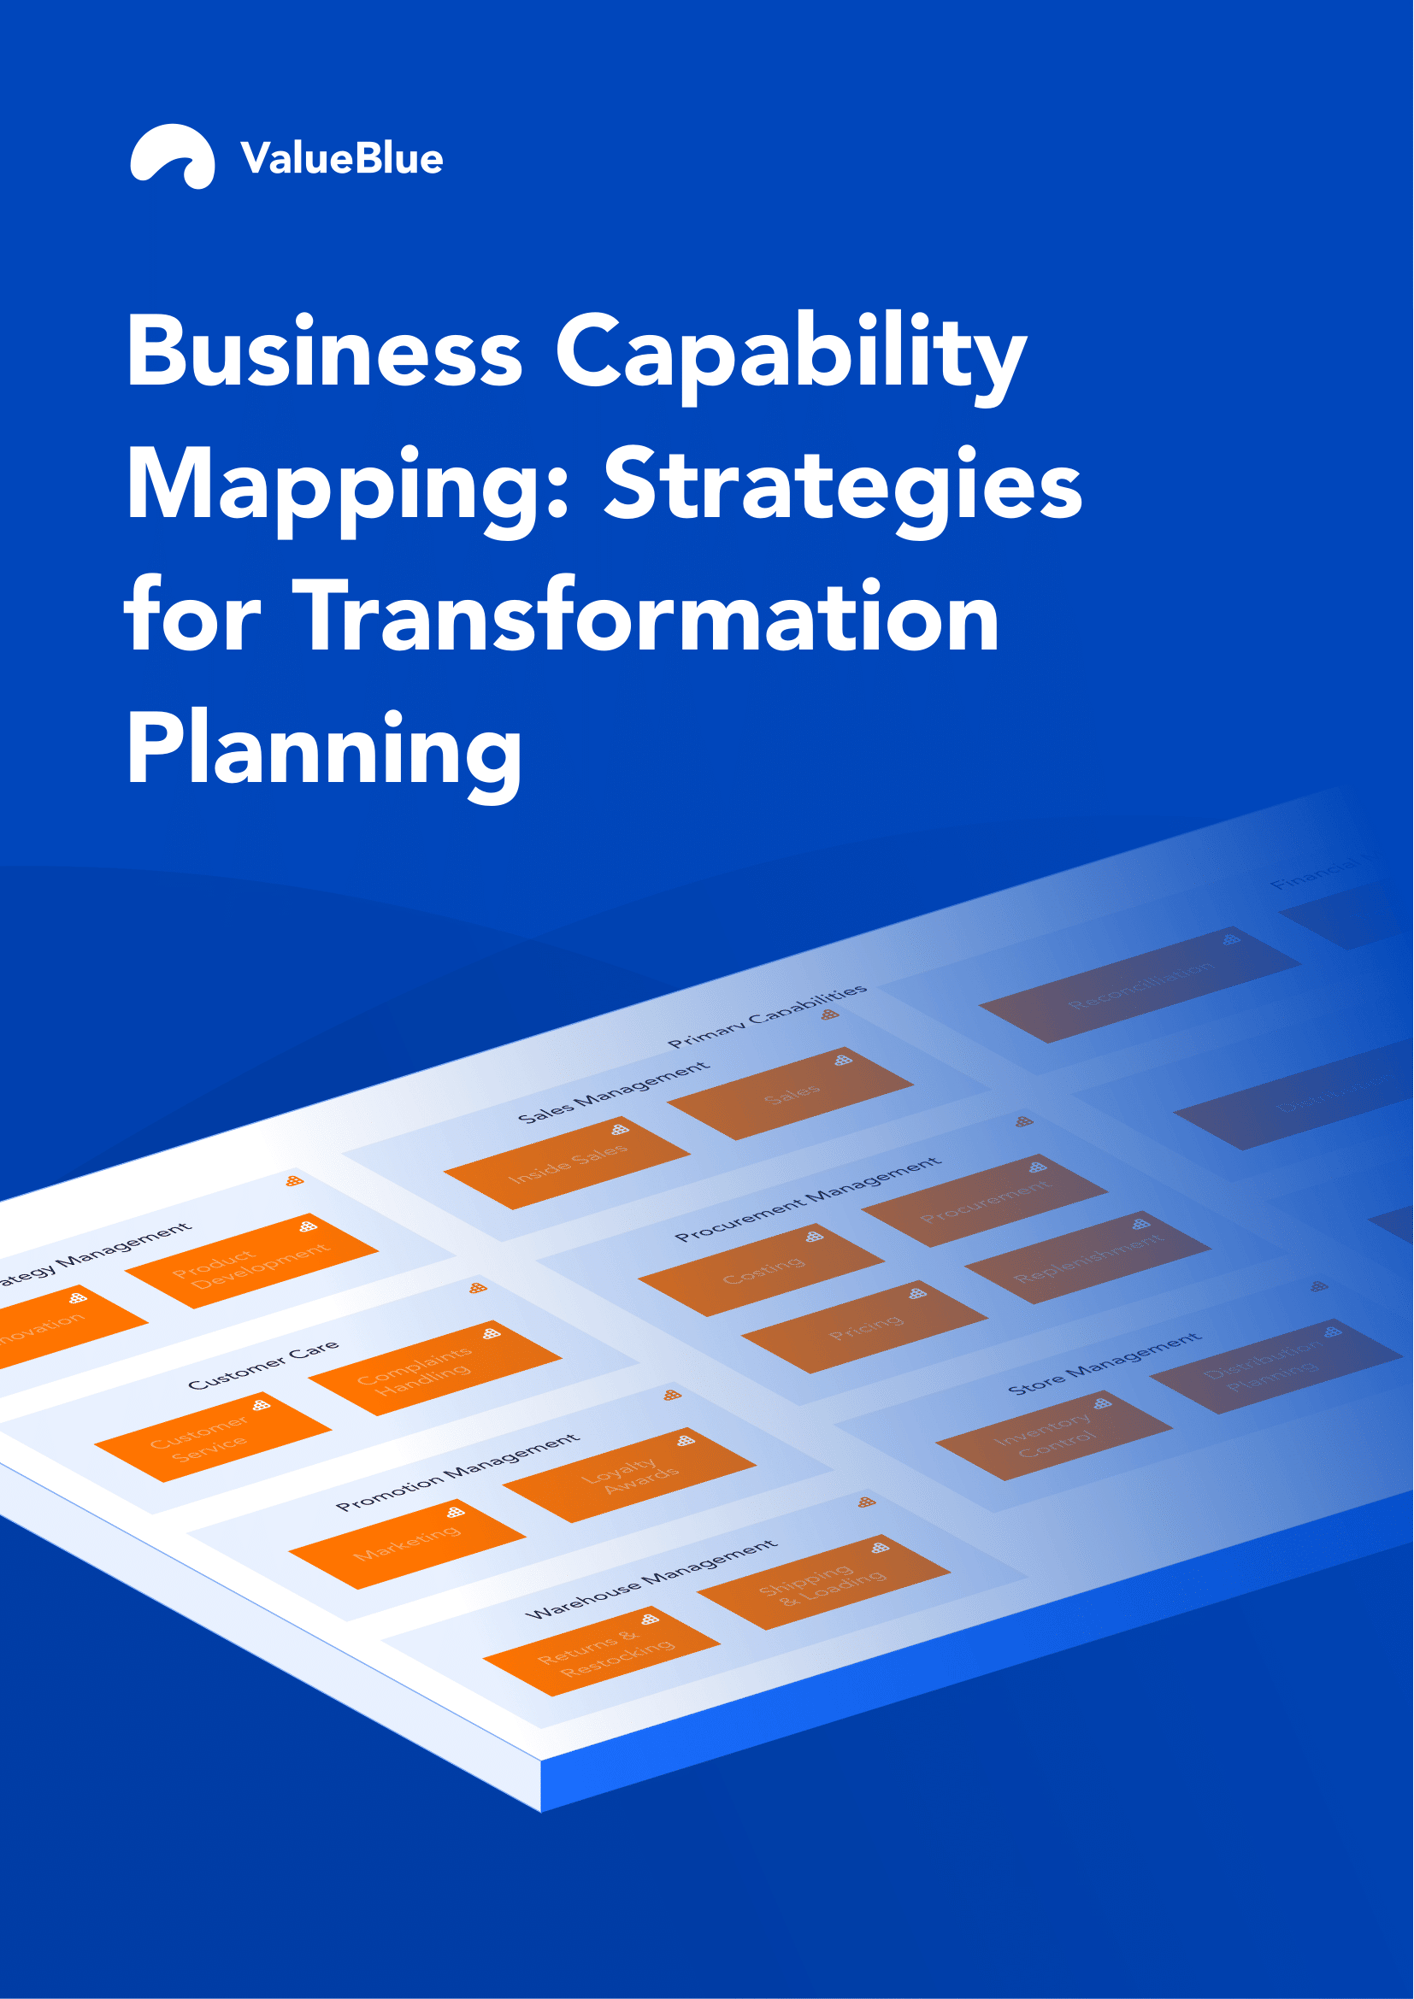 Ebook: Business Capability Mapping: Strategies for Transformation Planning